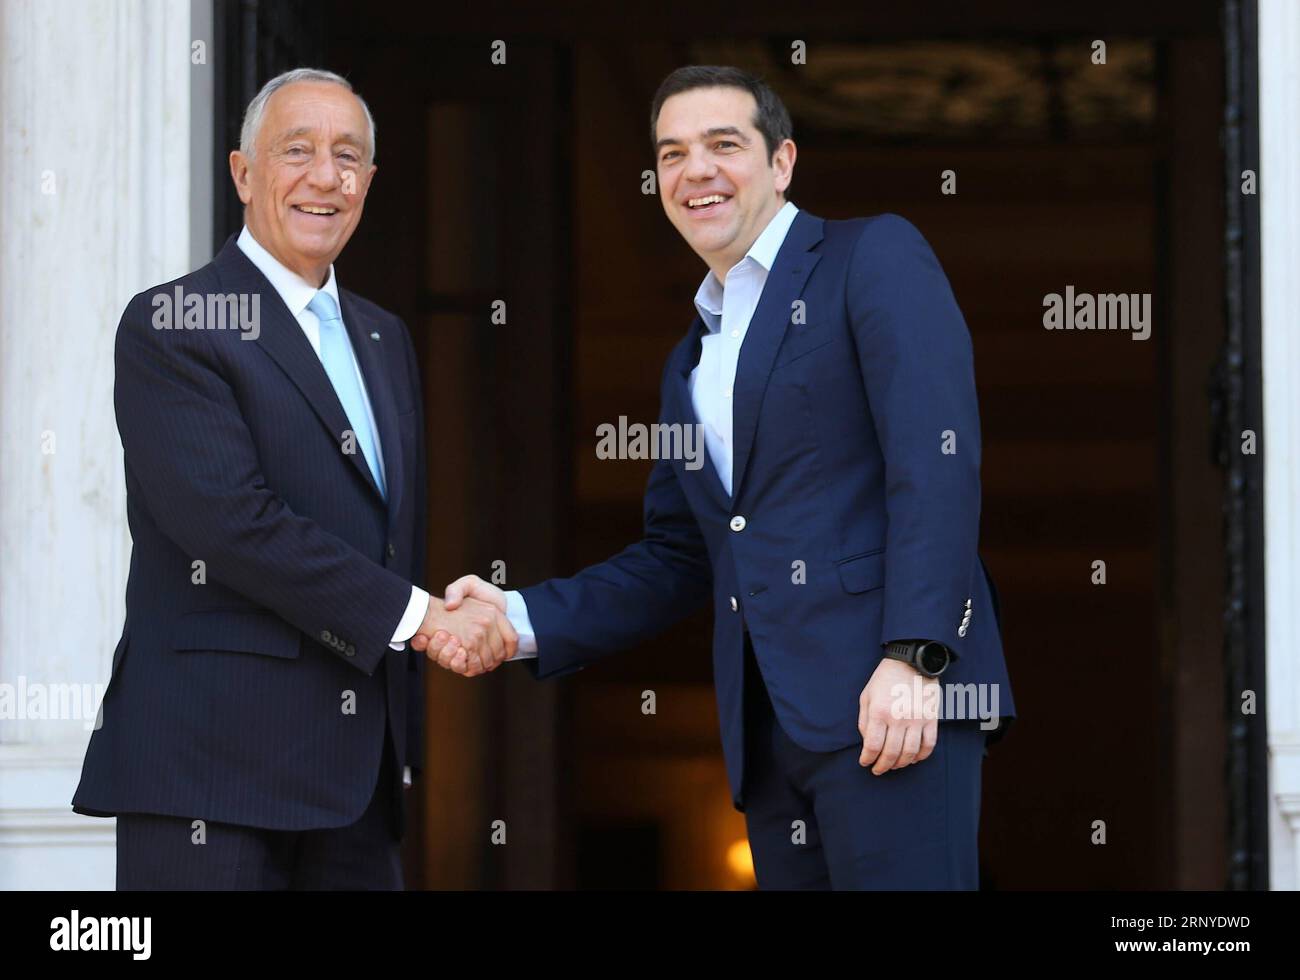 180313) -- ATHENS, March 13, 2018 -- Greek Prime Minister Alexis Tsipras  (R) welcomes Portuguese President Marcelo Rebelo de Sousa in Athens,  Greece, on March 13, 2018. Greece can count on Portugal